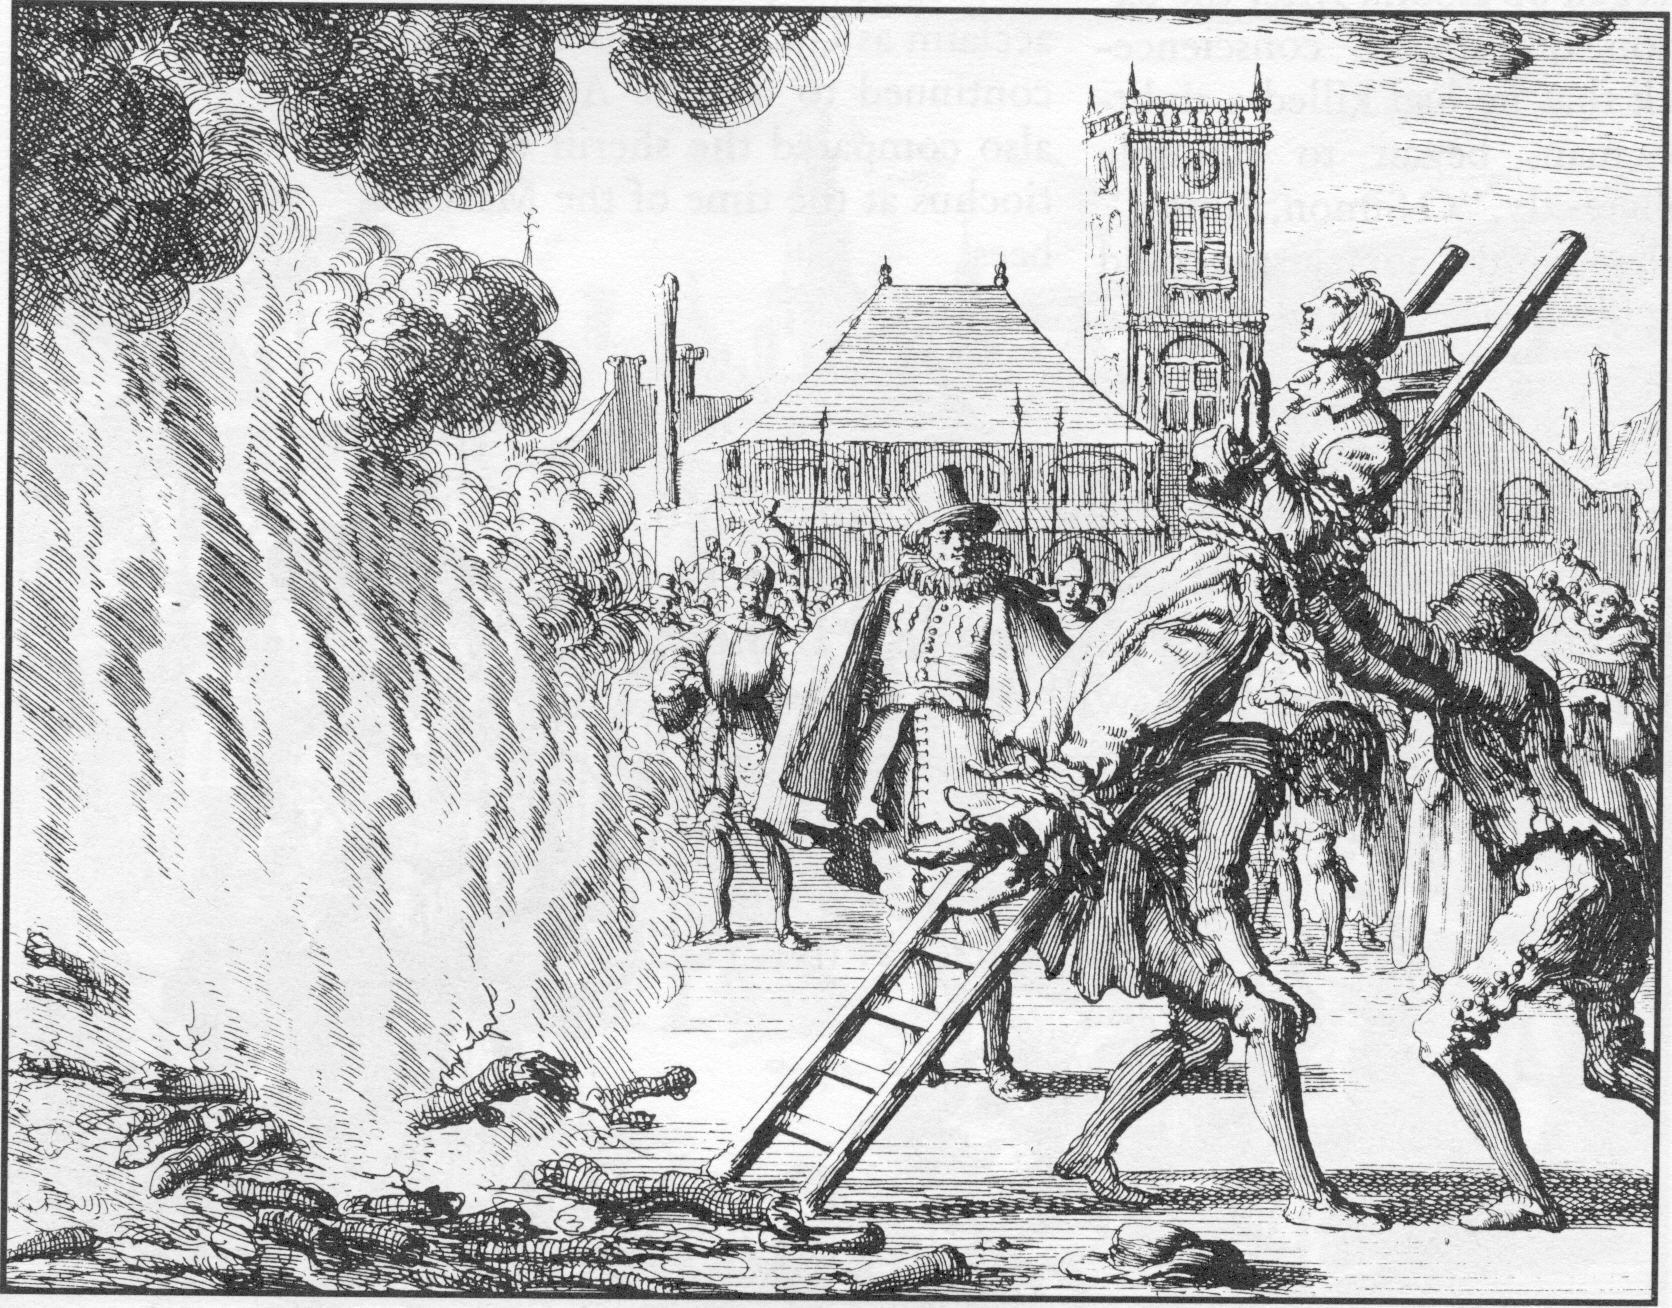 Anneken de Vlaster an Anabaptist Woman being thrown into the fire in 1571 in Mirror of the Martyrs p 24